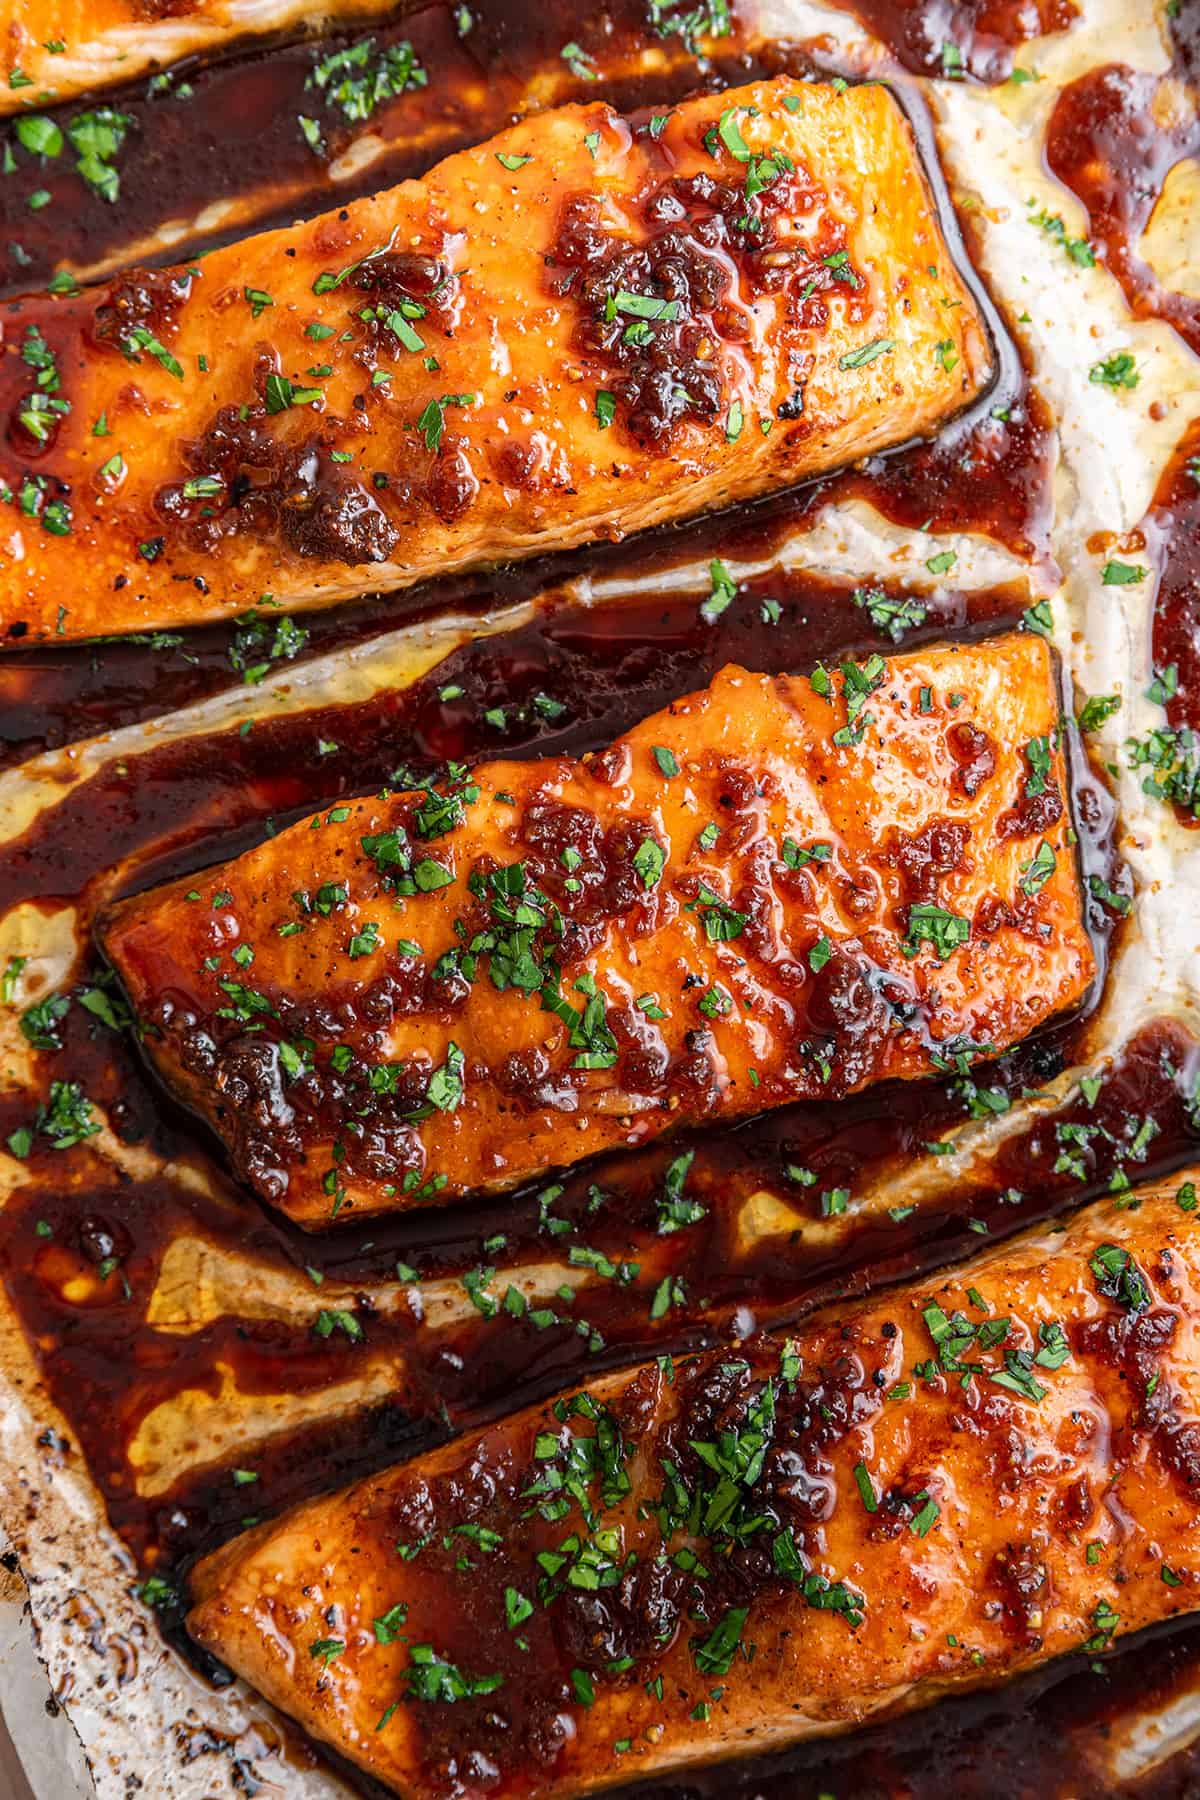 Overhead view of three honey glazed salmon fillets on a baking sheet